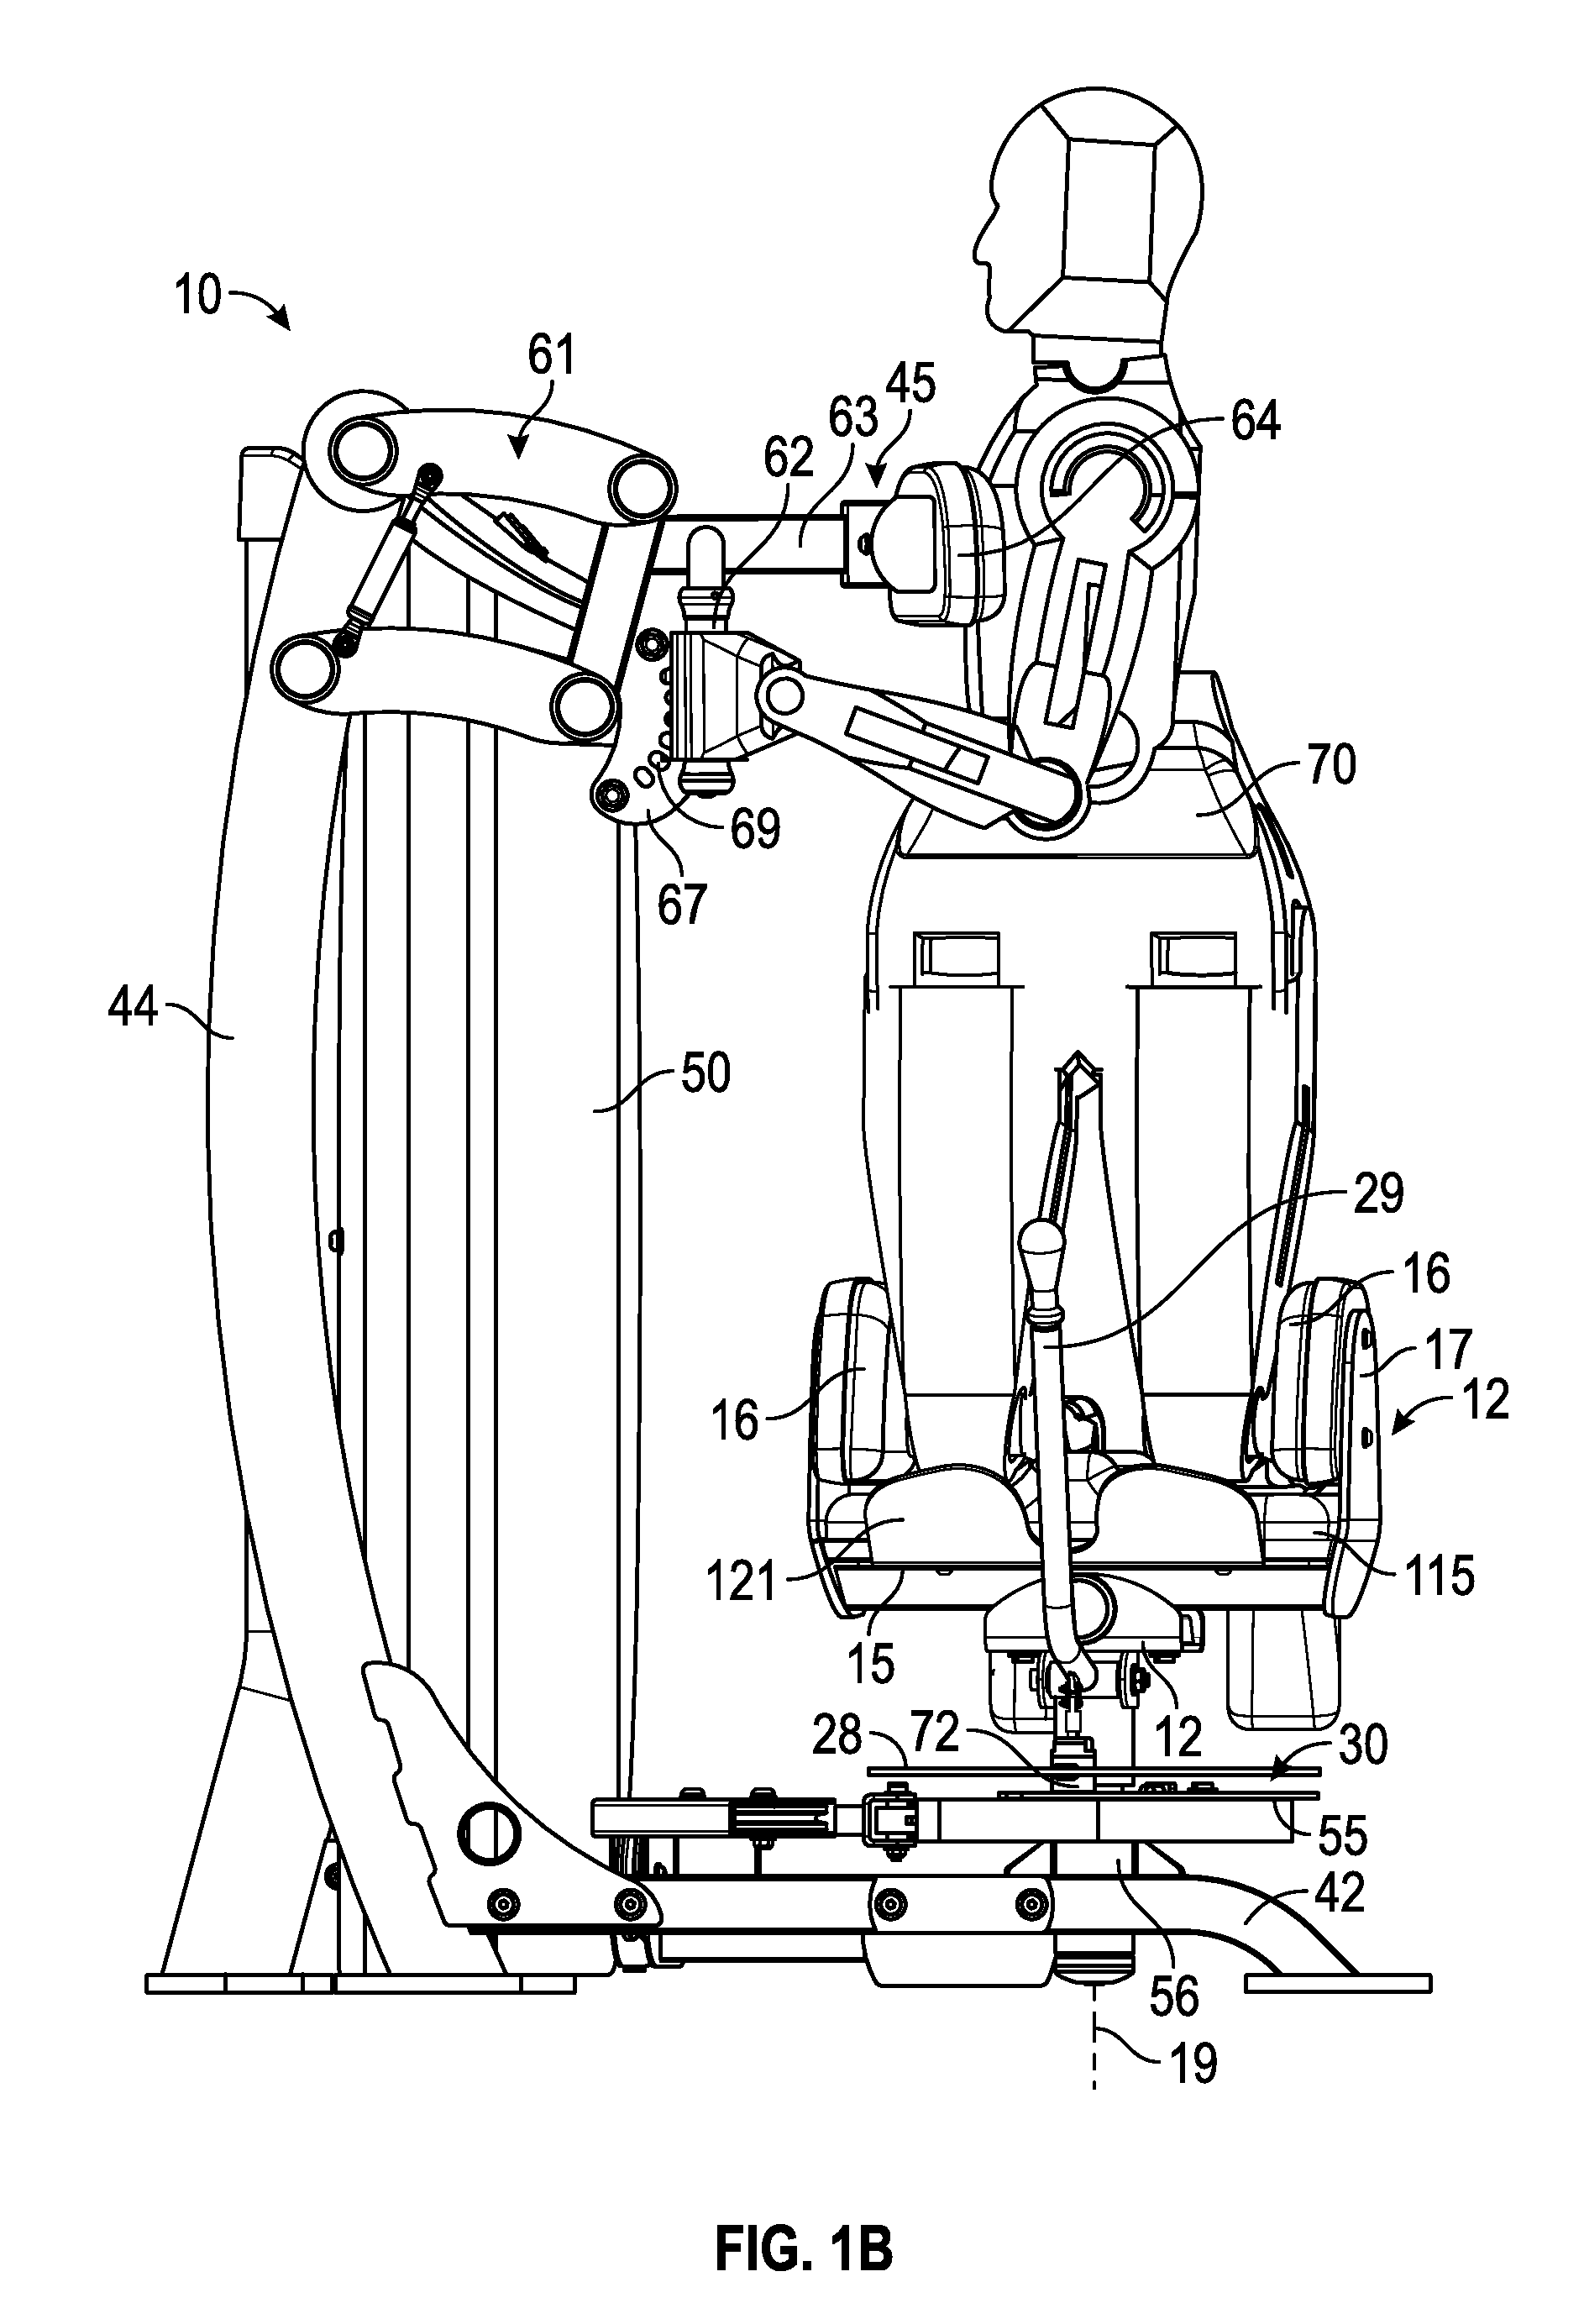 Exercise machine with movable user support